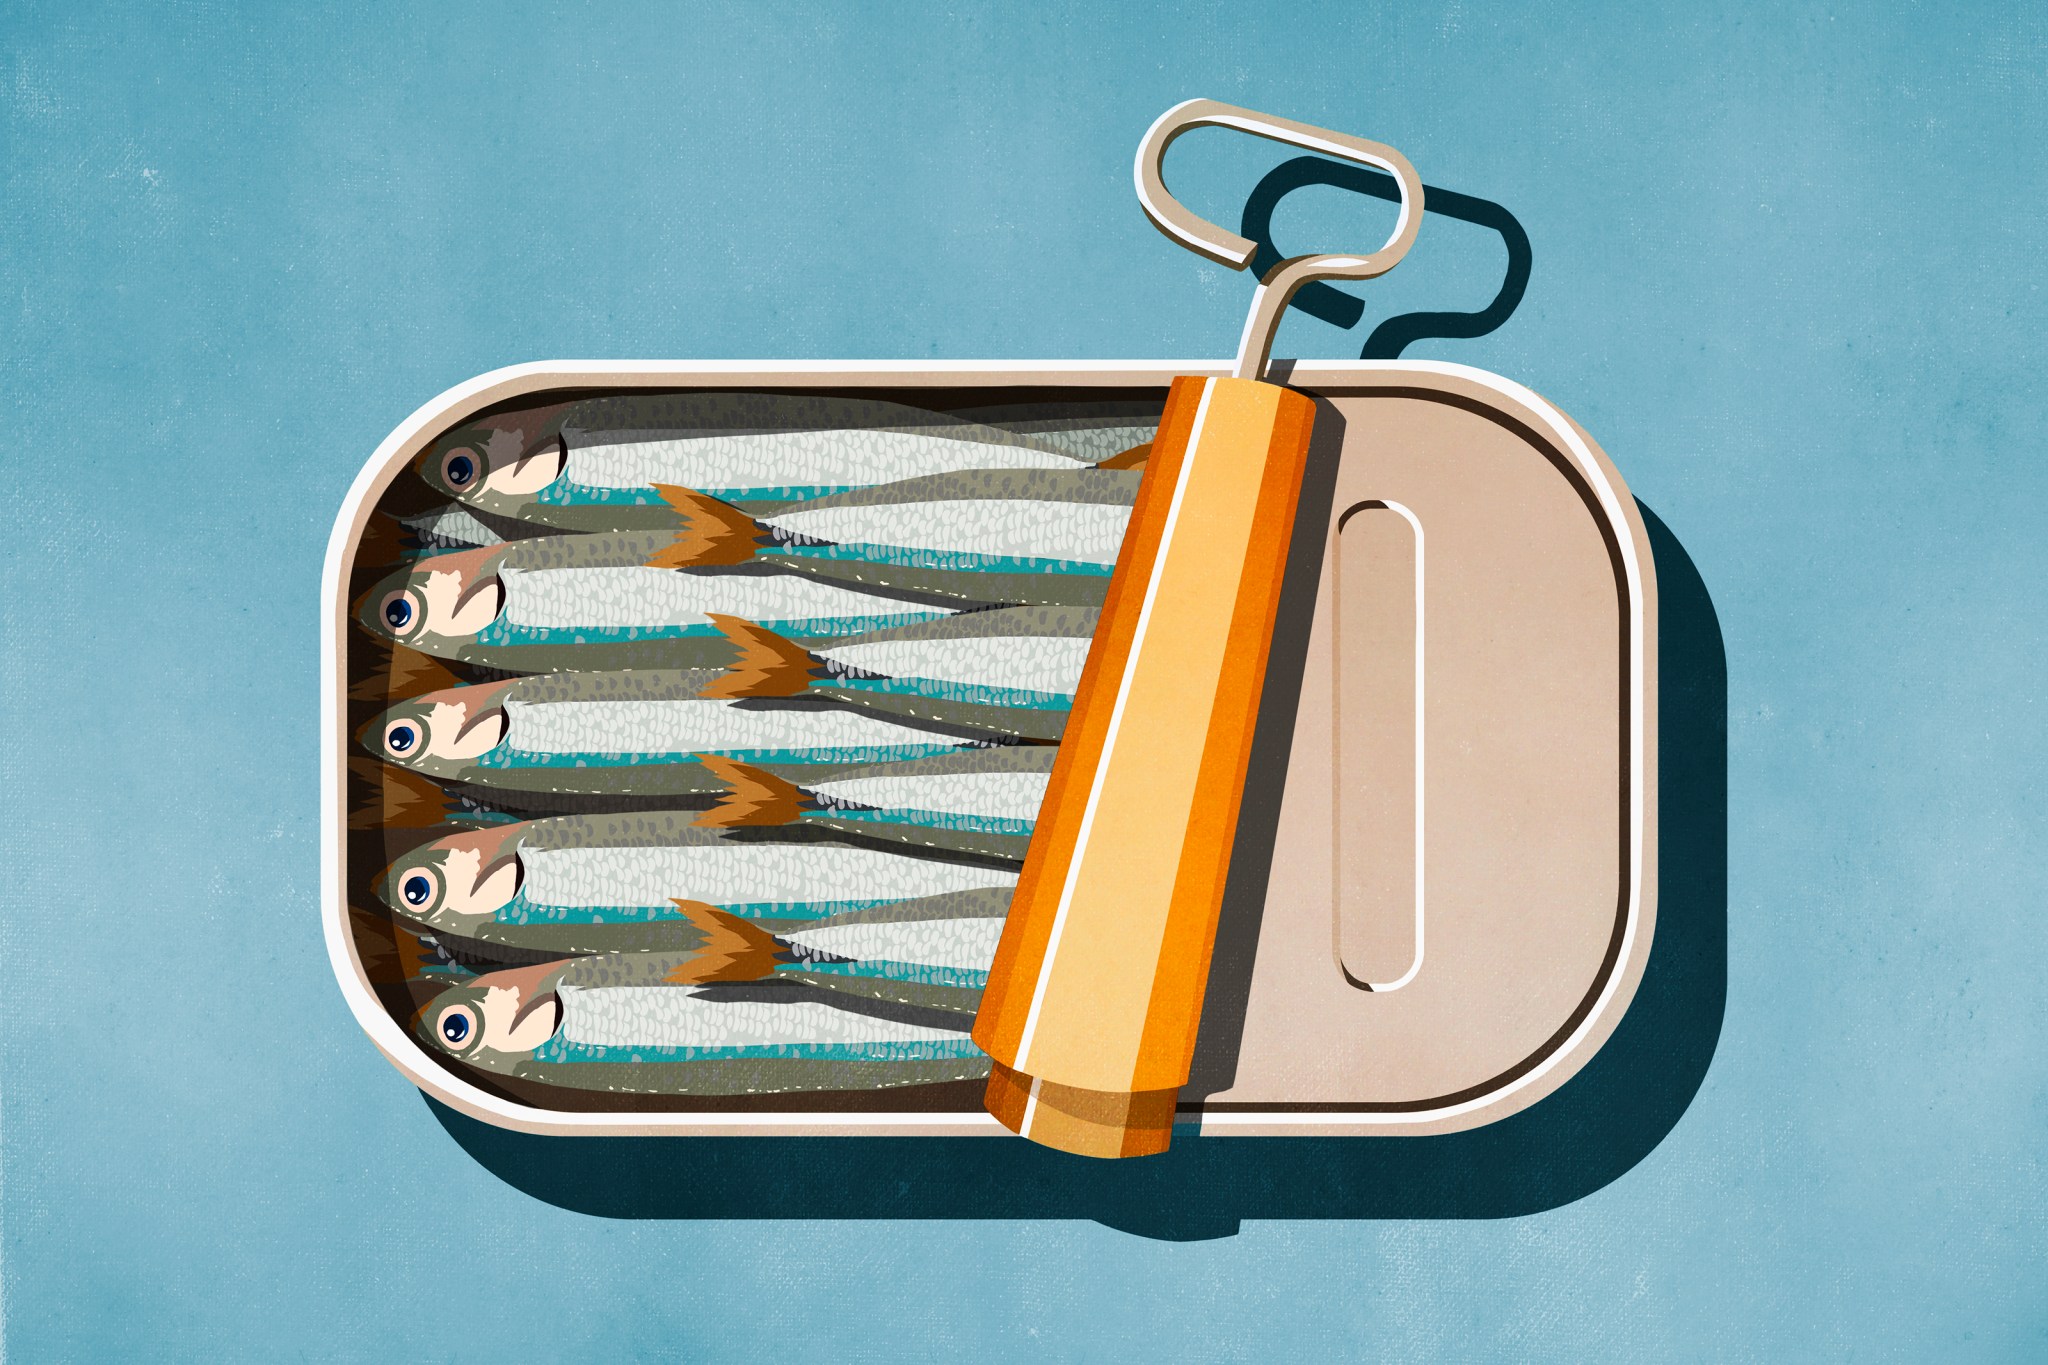 Illustration of an open can of sardines on blue background.